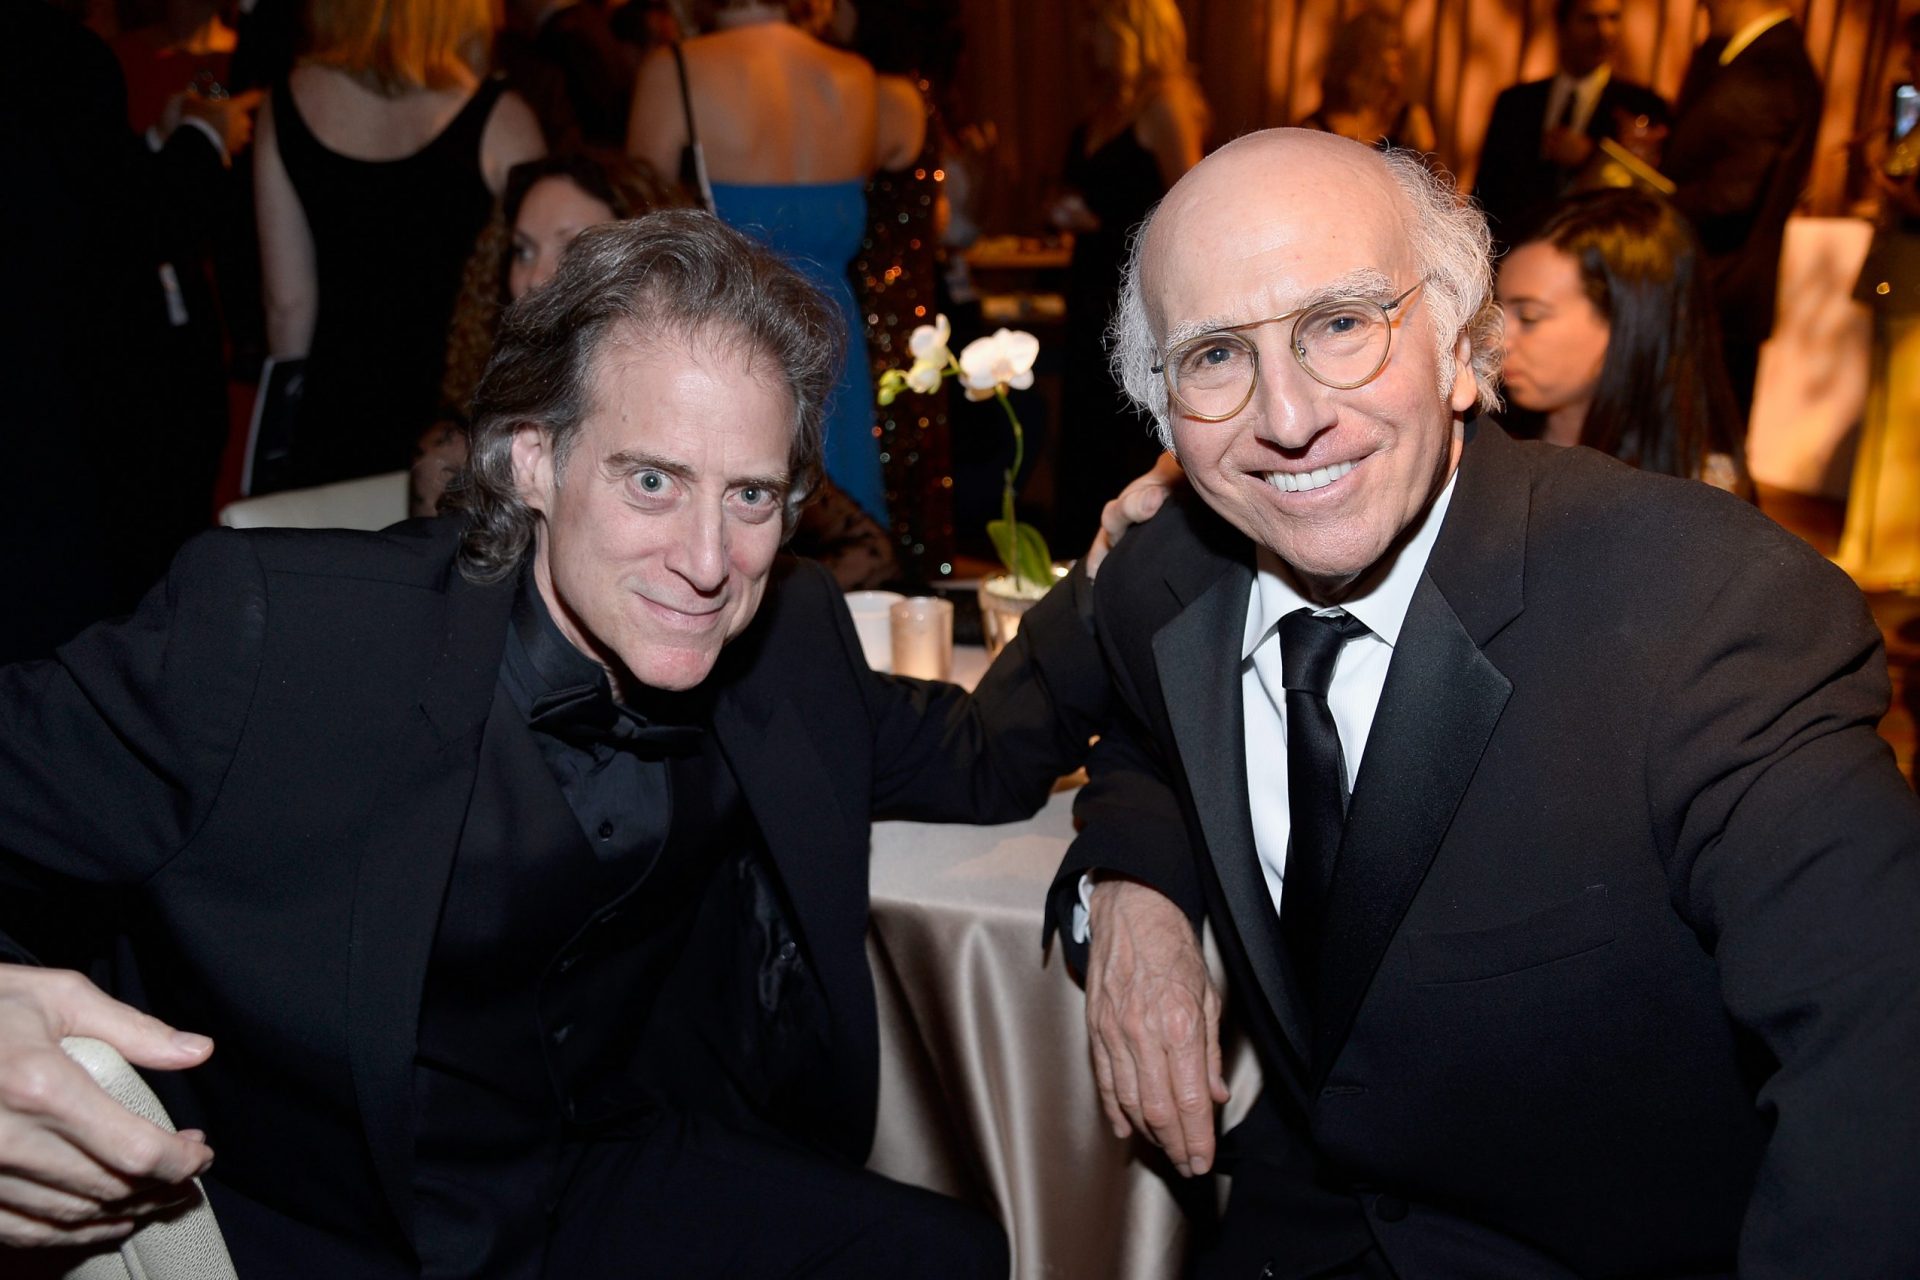 Lewis and comedian Larry David were lifelong friends and collaborators